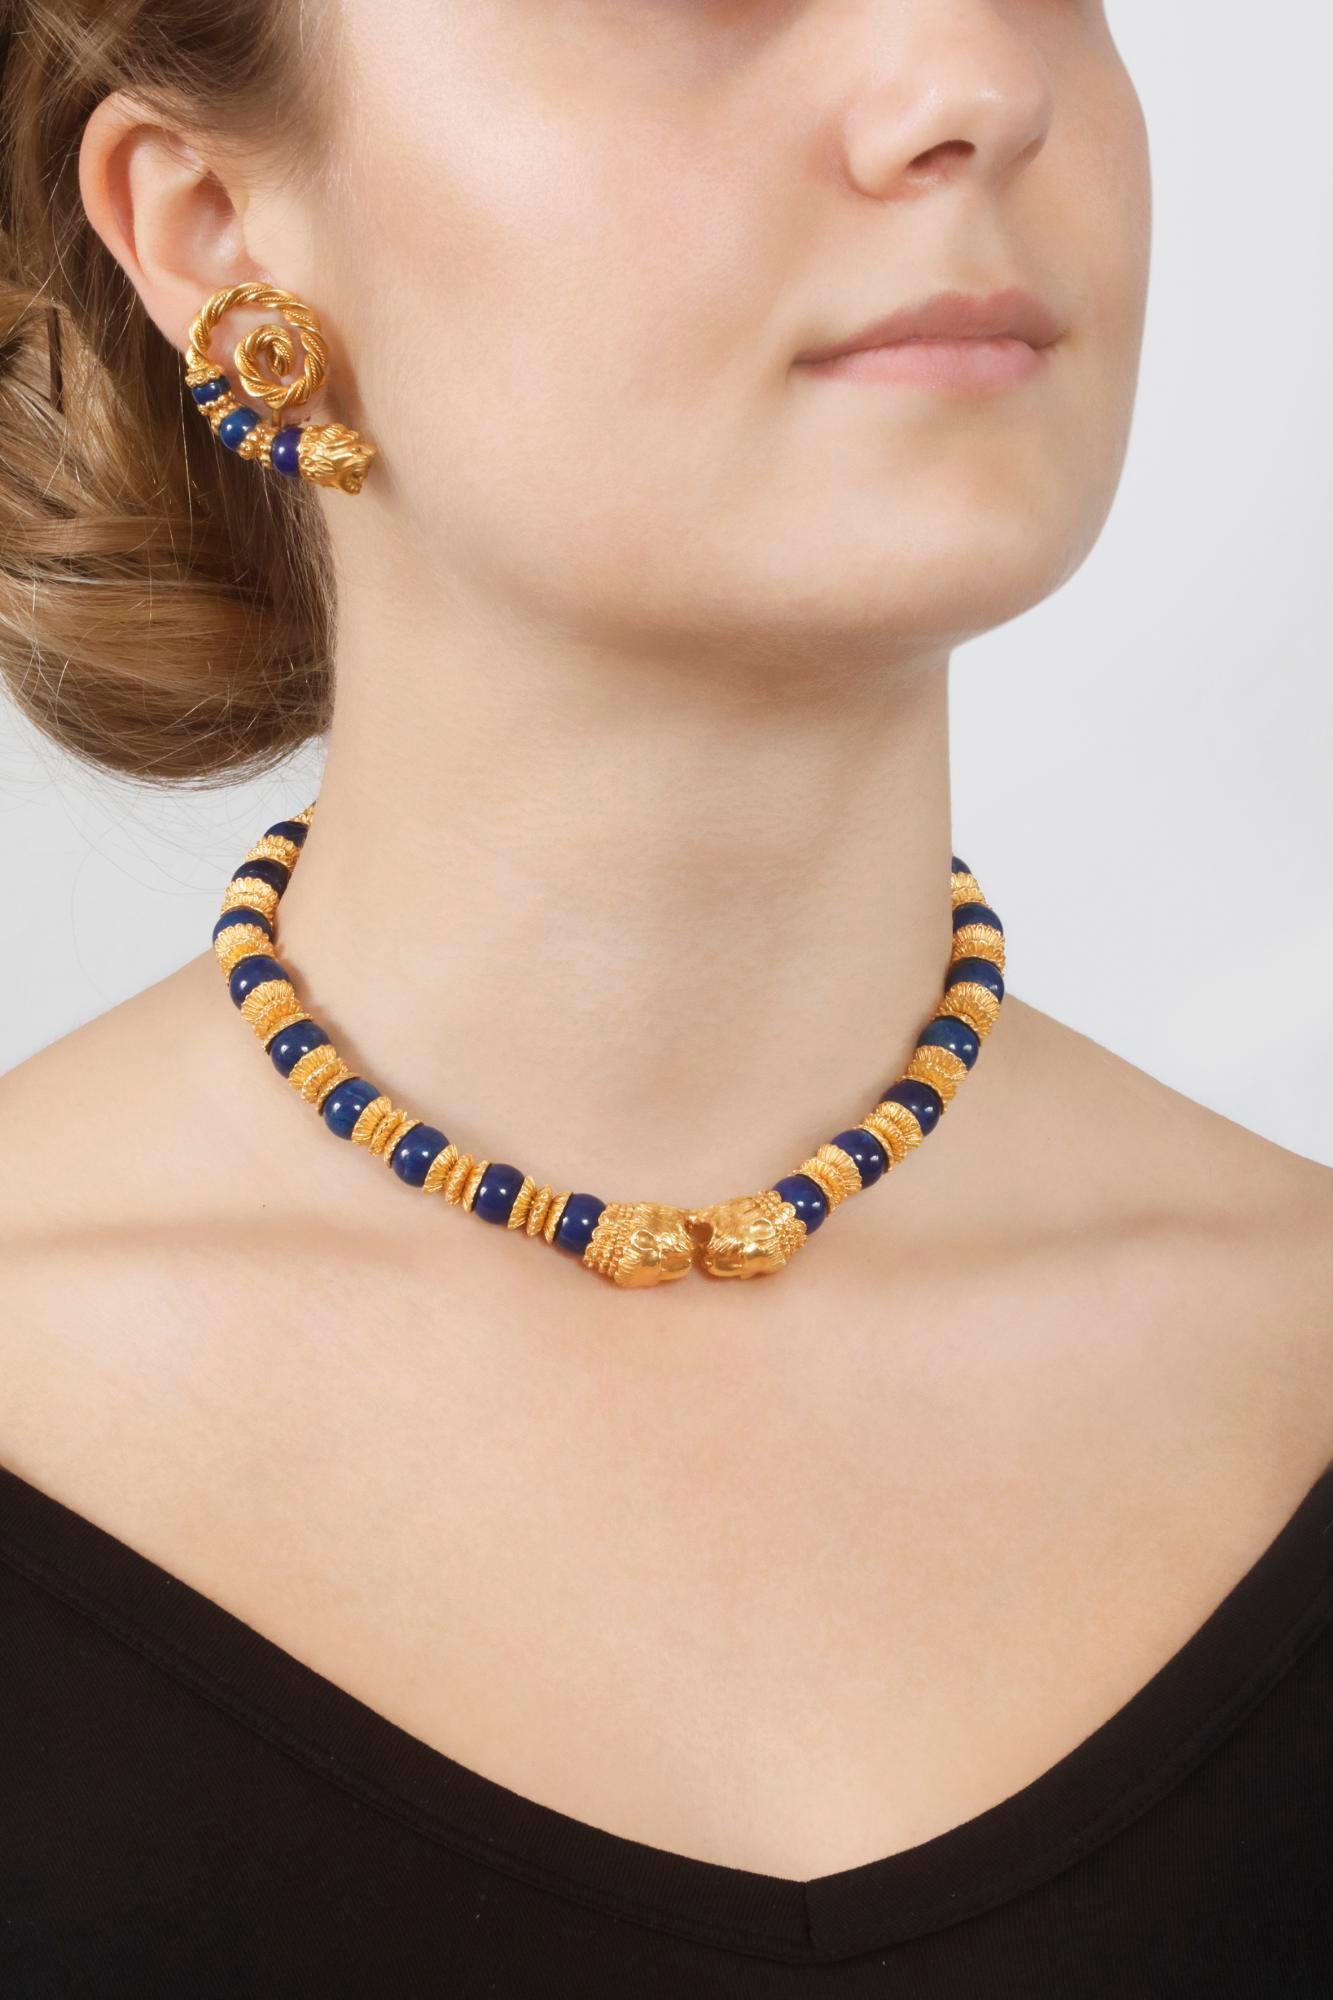 A beautiful demi-parure by Zolotas comprising a necklace composed of lapis lazuli spheres alternating with structured gold separators, the front embellished with lion head motifs. Length approximately 360mm, French import assay mark for gold; and a